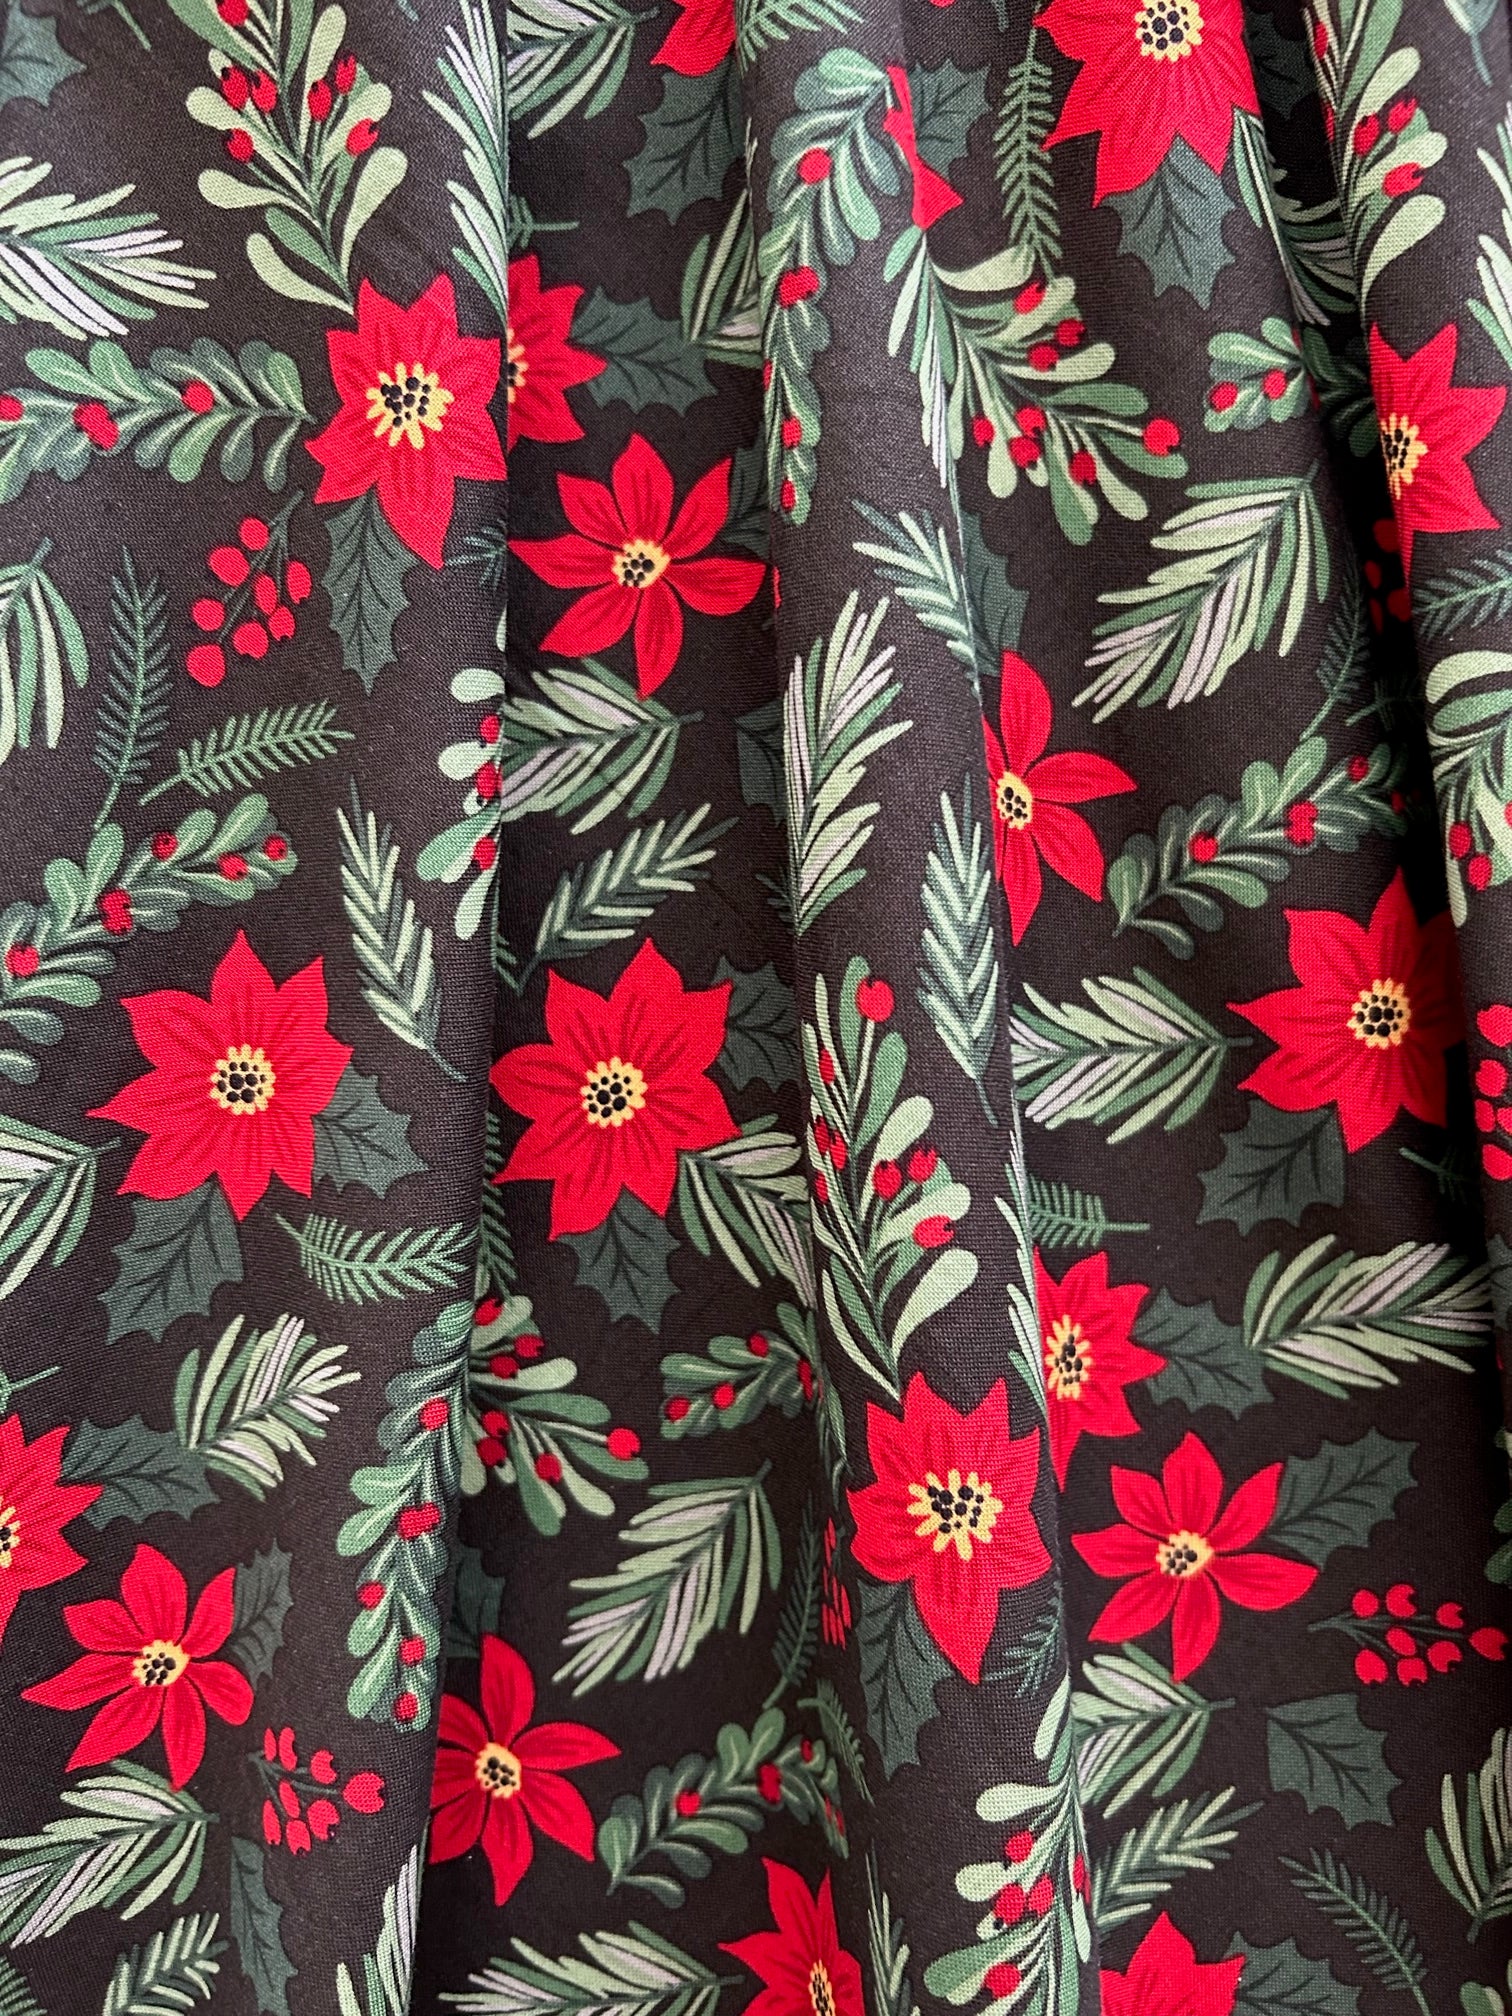 close up of print showing red poinsettias and green branches